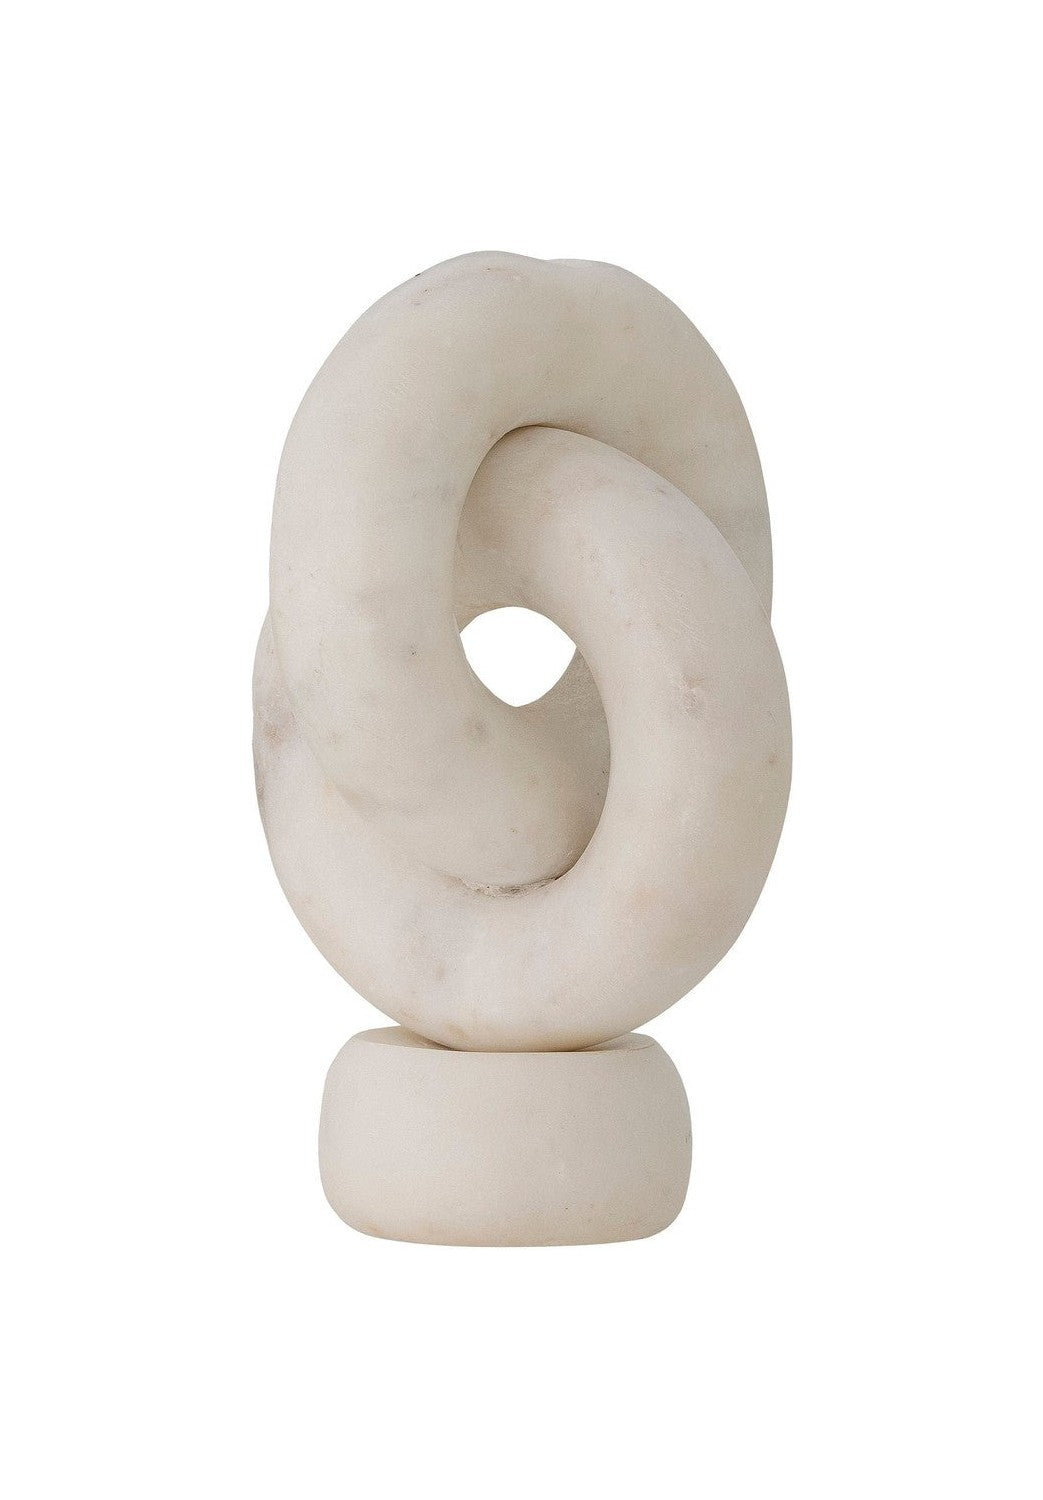 Bloomingville Goa Candle Holder, White, Marble